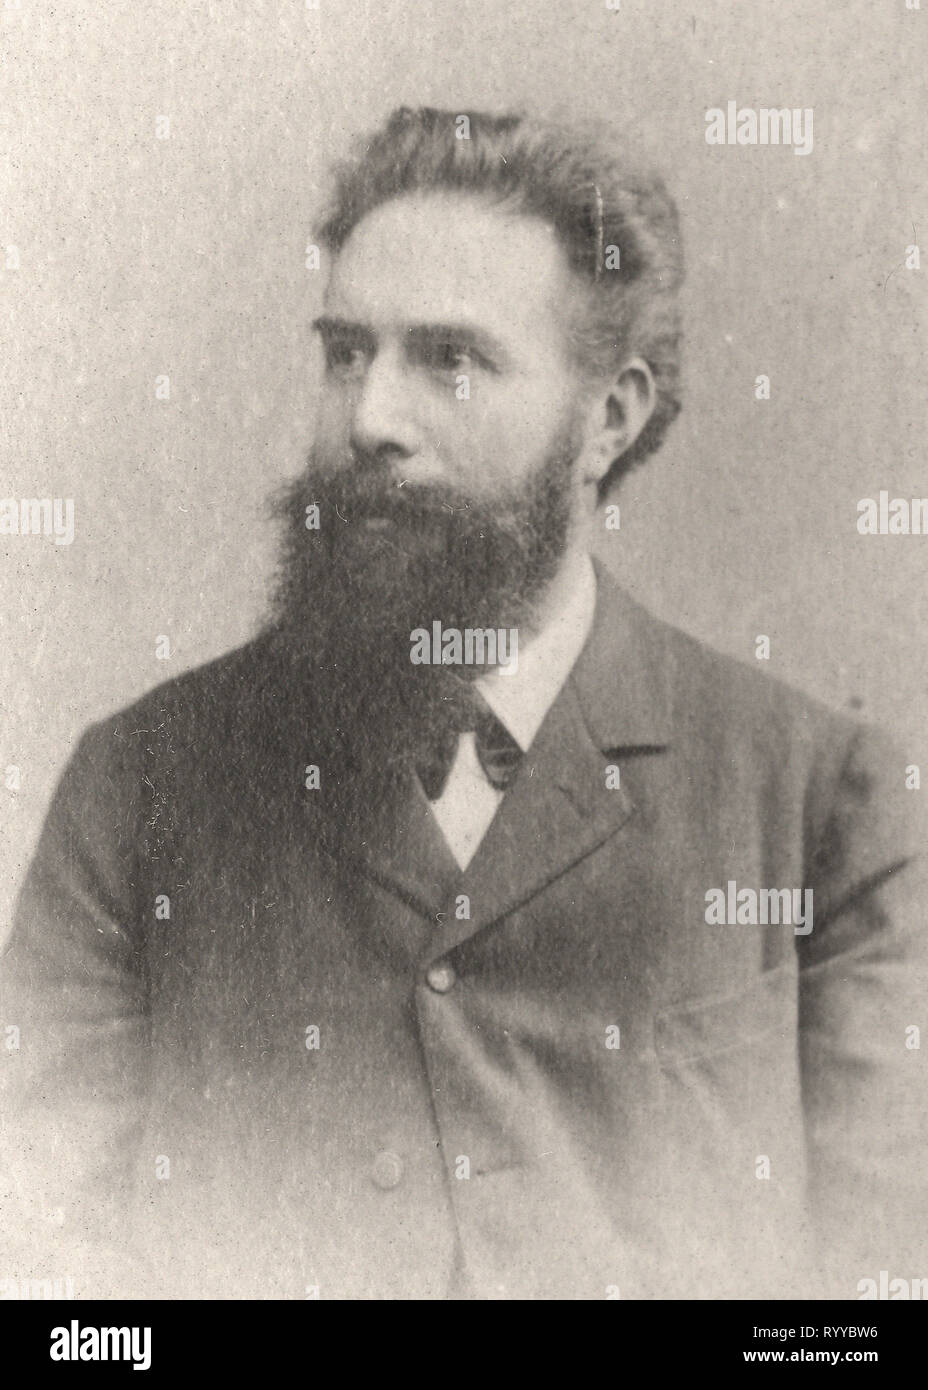 Photographic Portrait Of Roentgen   From Collection Félix Potin, Early 20th Century Stock Photo